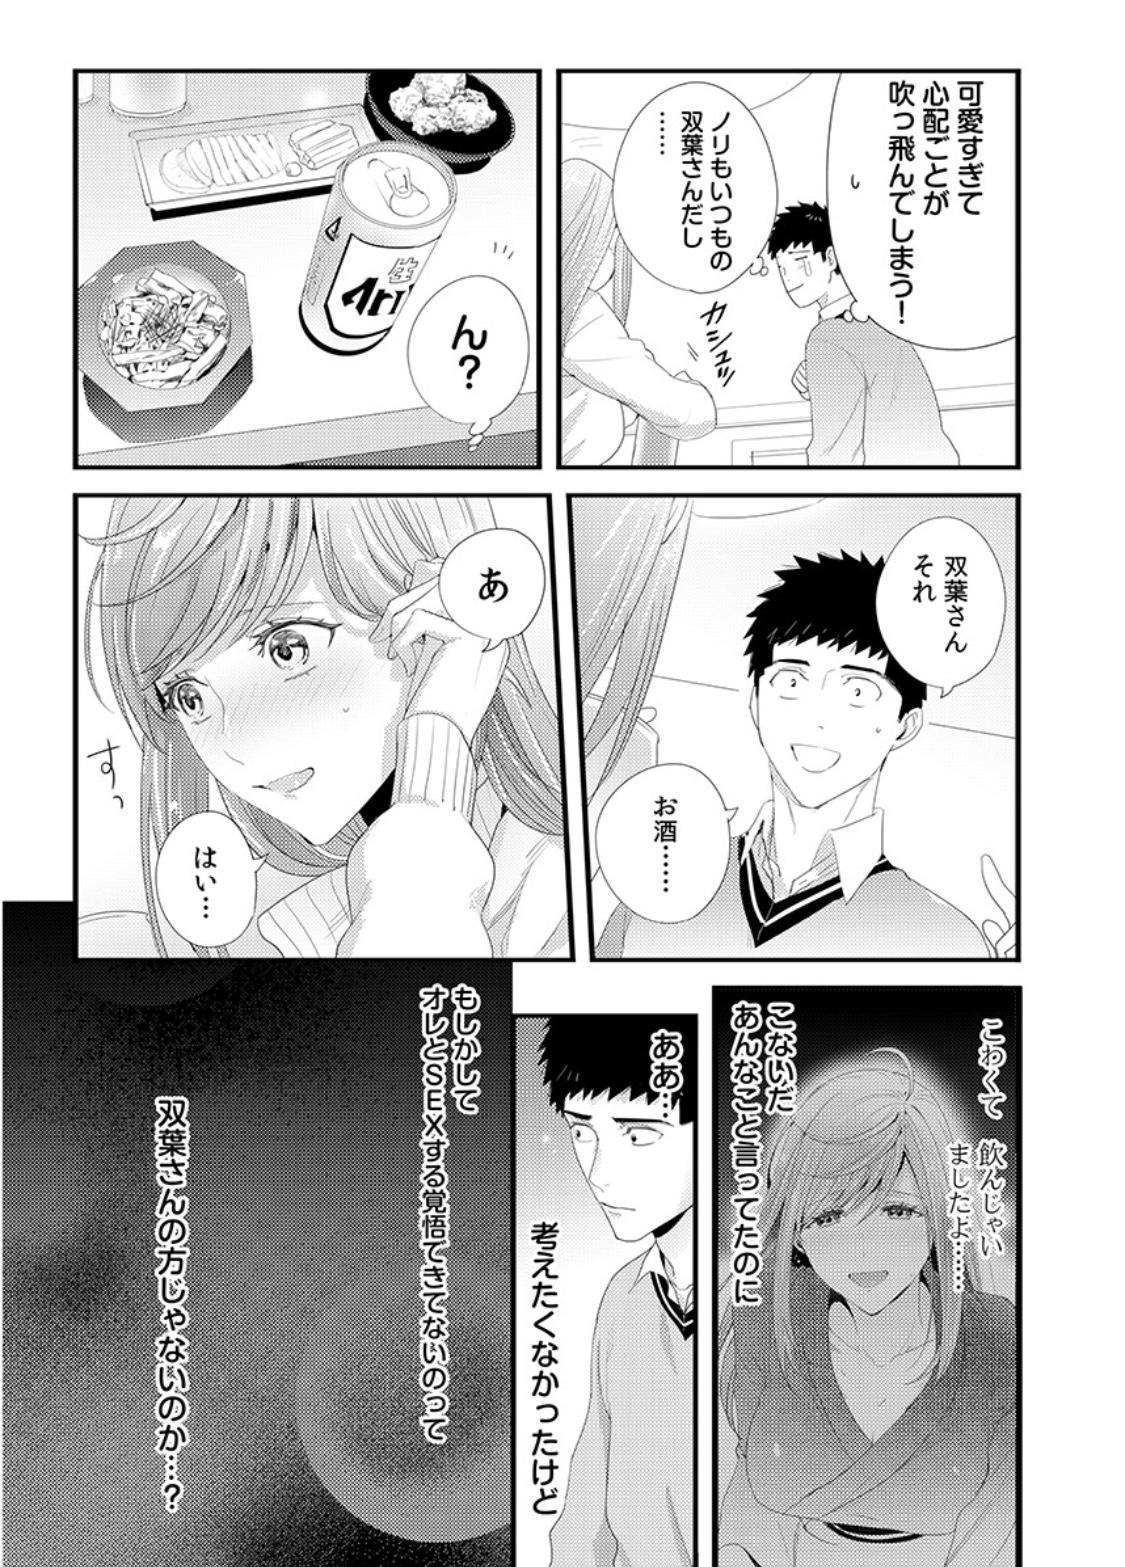 Please Let Me Hold You Futaba-San! Ch. 1-4 41